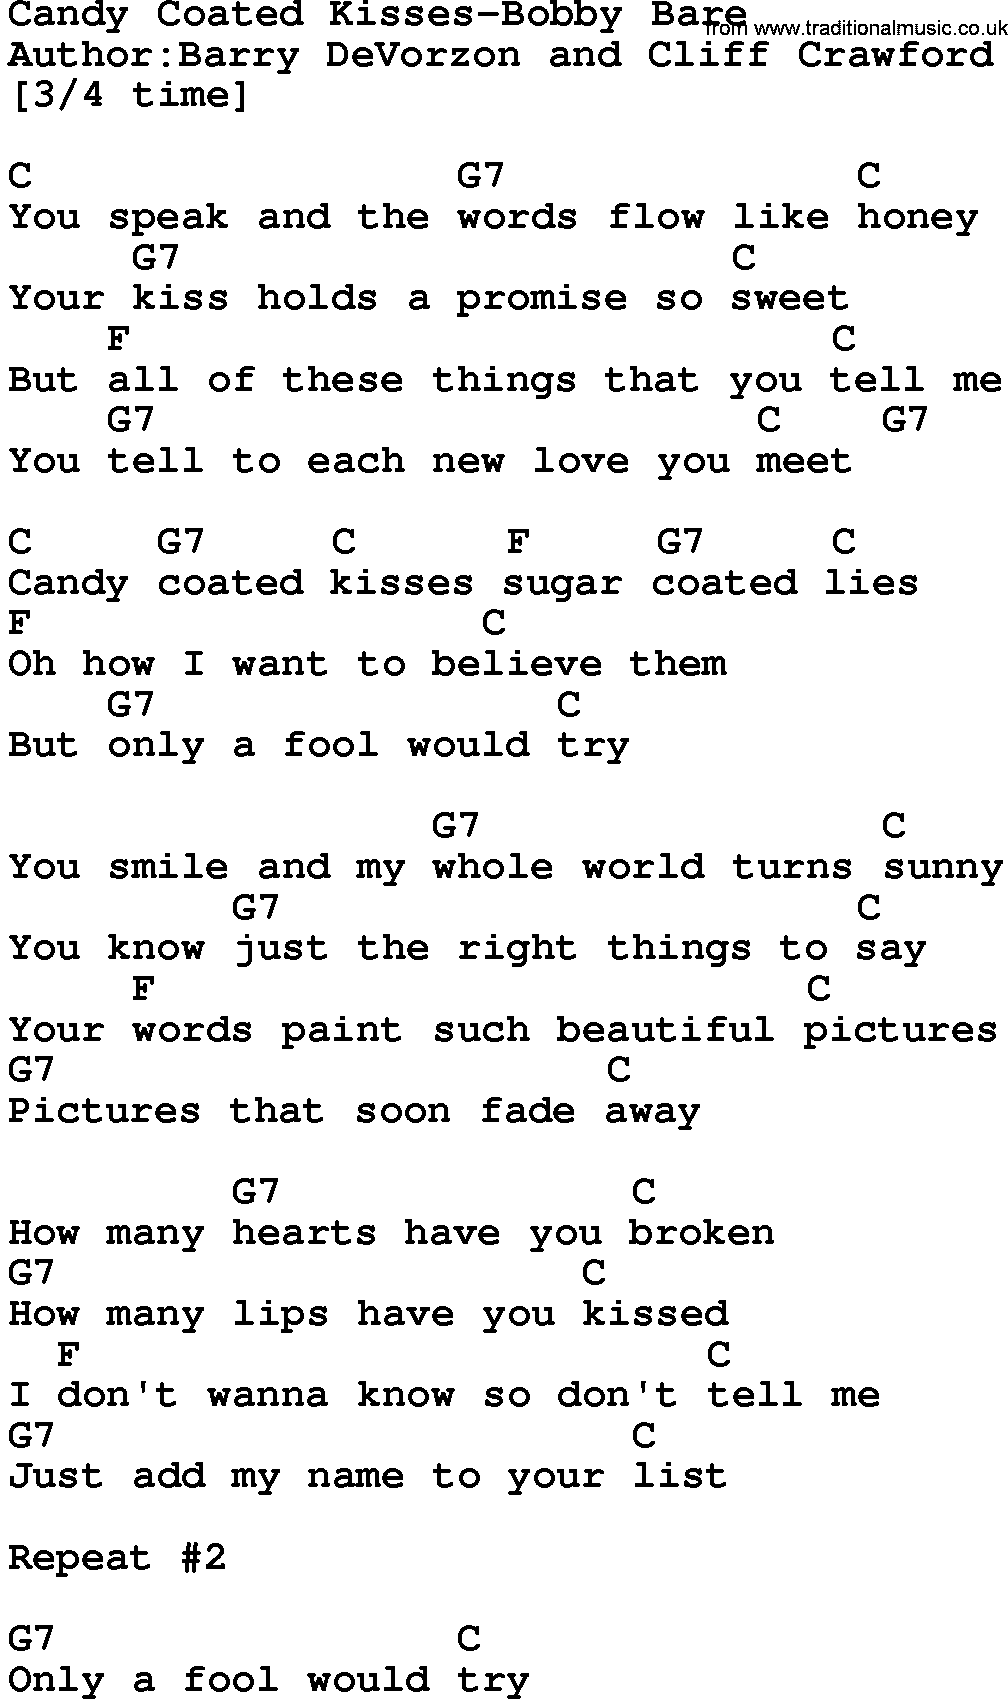 Country music song: Candy Coated Kisses-Bobby Bare lyrics and chords